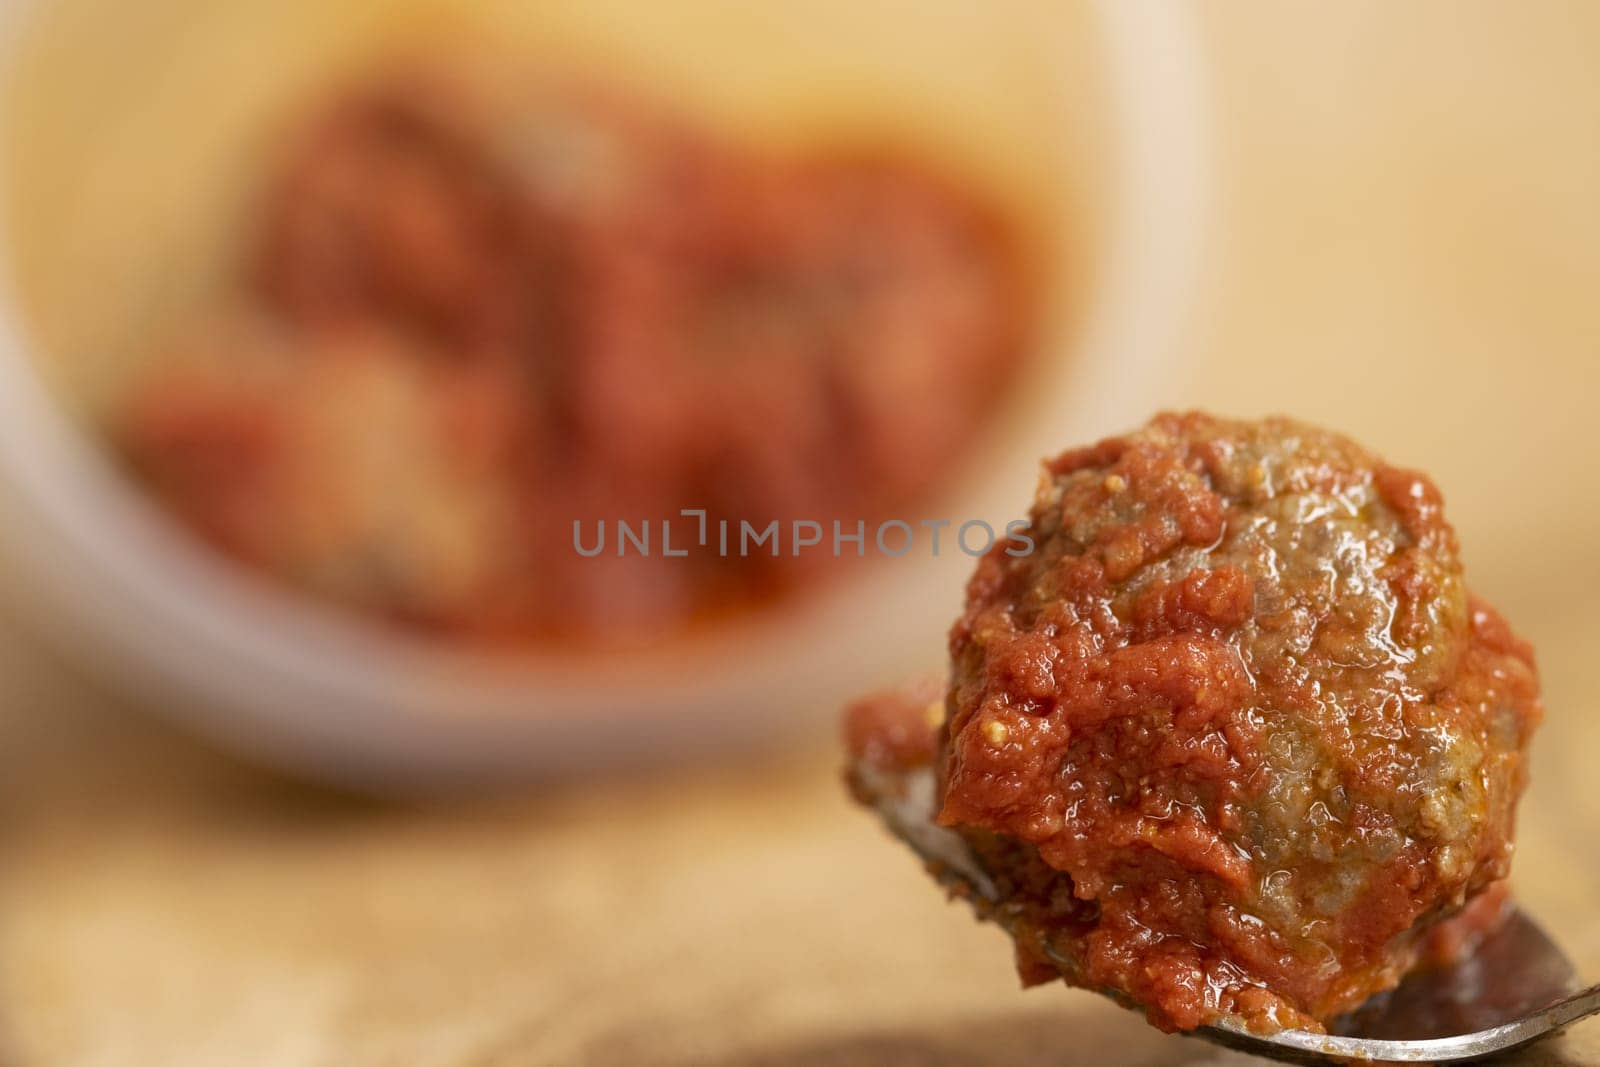 meatball in tomato sauce by salmas